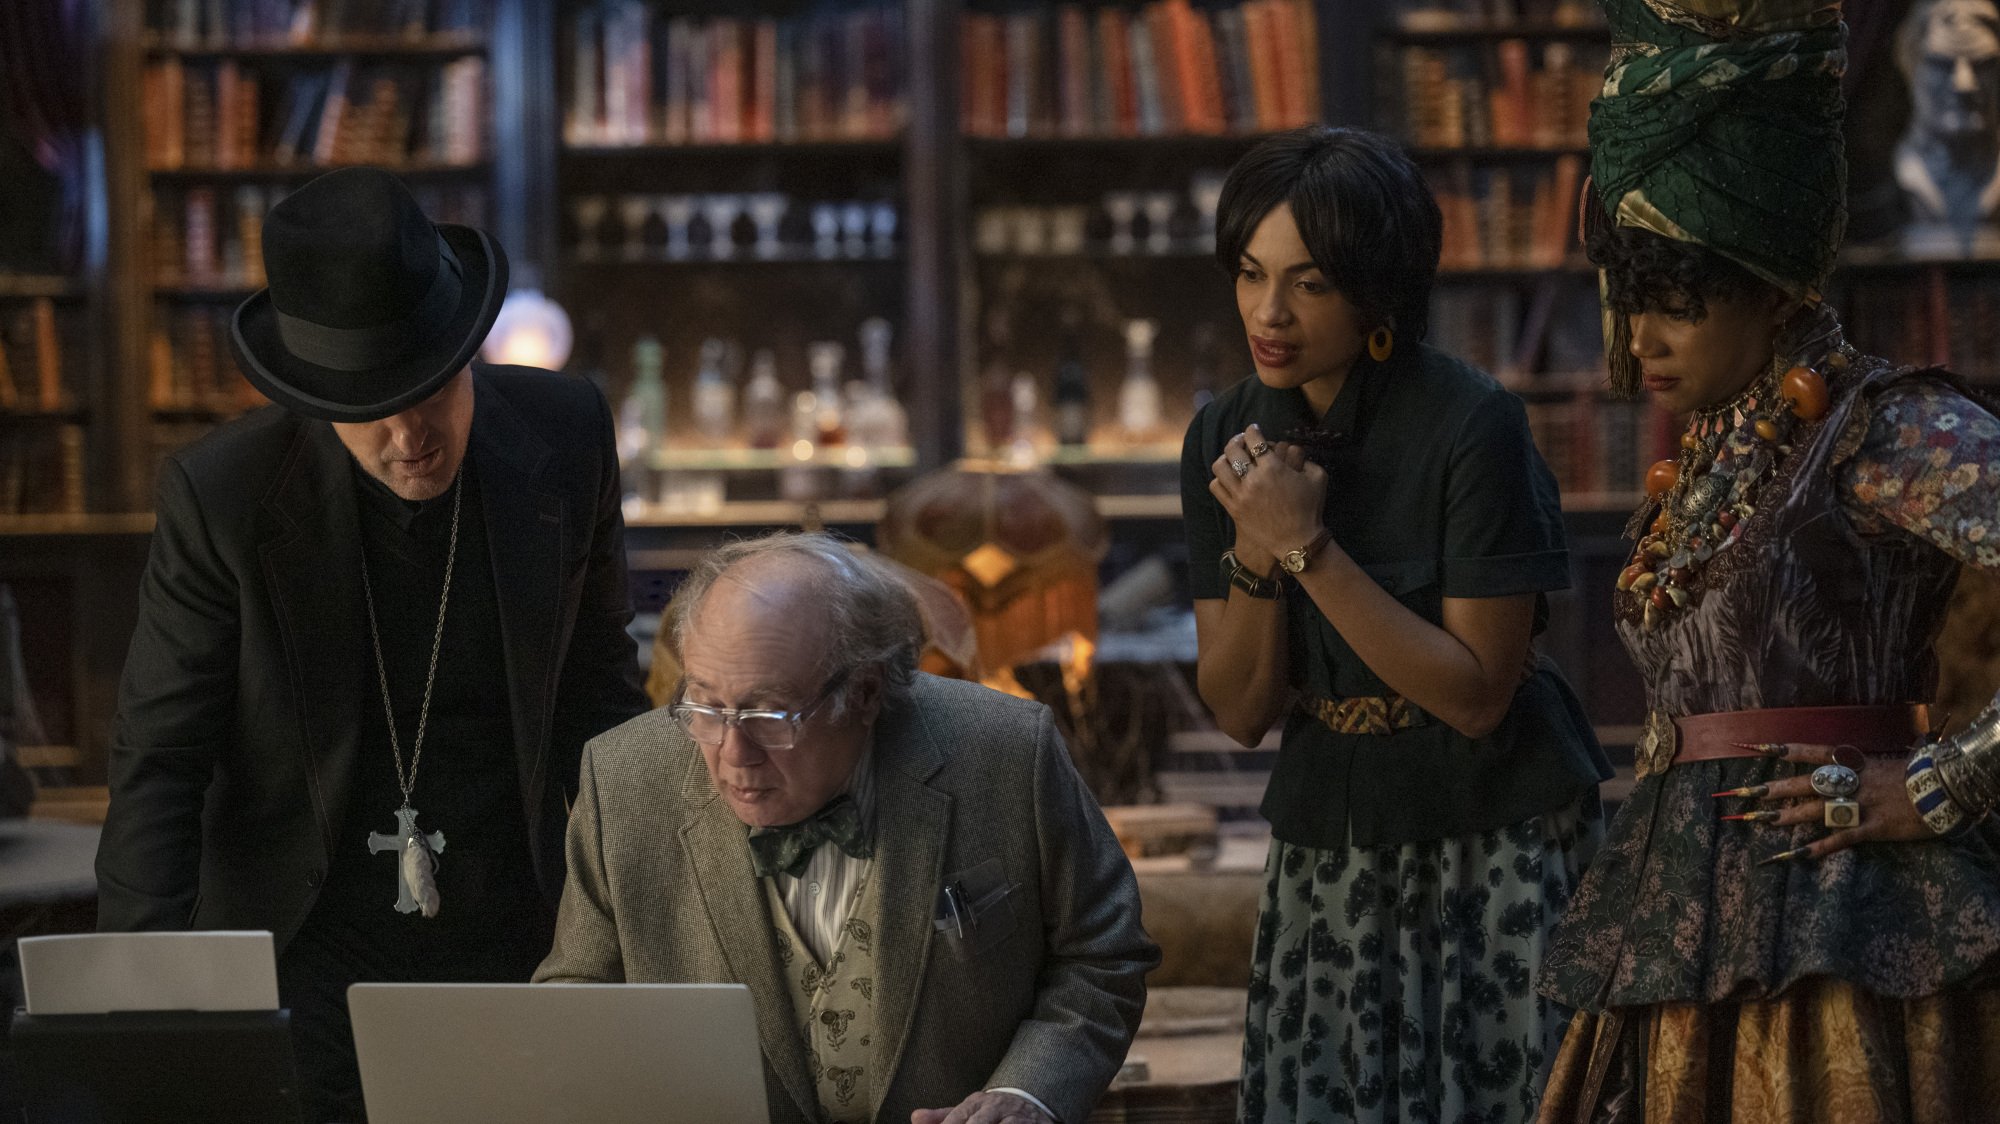 Owen Wilson as Father Kent, Danny DeVito as Bruce, Rosario Dawson as Gabbie, and Tiffany Haddish as Harriet in Disney's live-action HAUNTED MANSION.